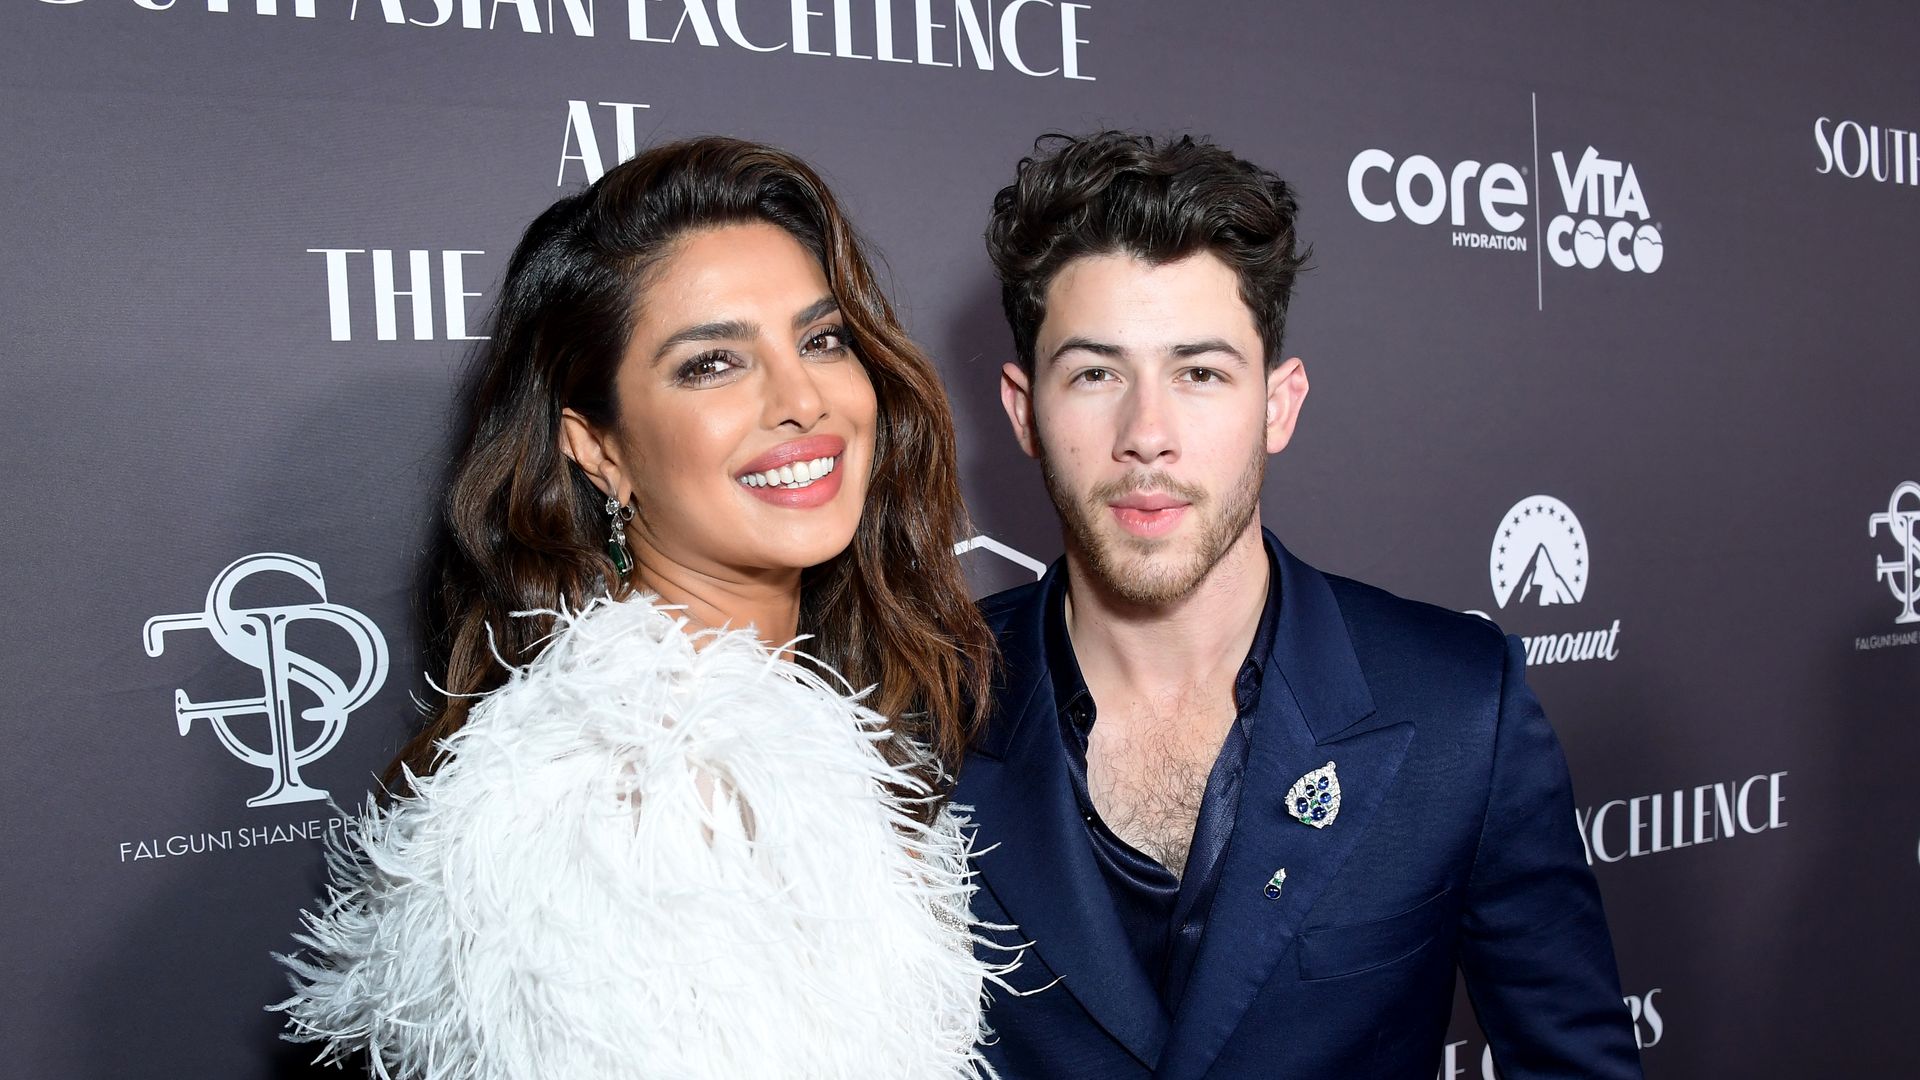 Priyanka Chopra Jonas and Nick Jonas attend the 2nd Annual South Asian Excellence Pre-Oscars Celebration at Paramount Pictures Studios on March 09, 2023